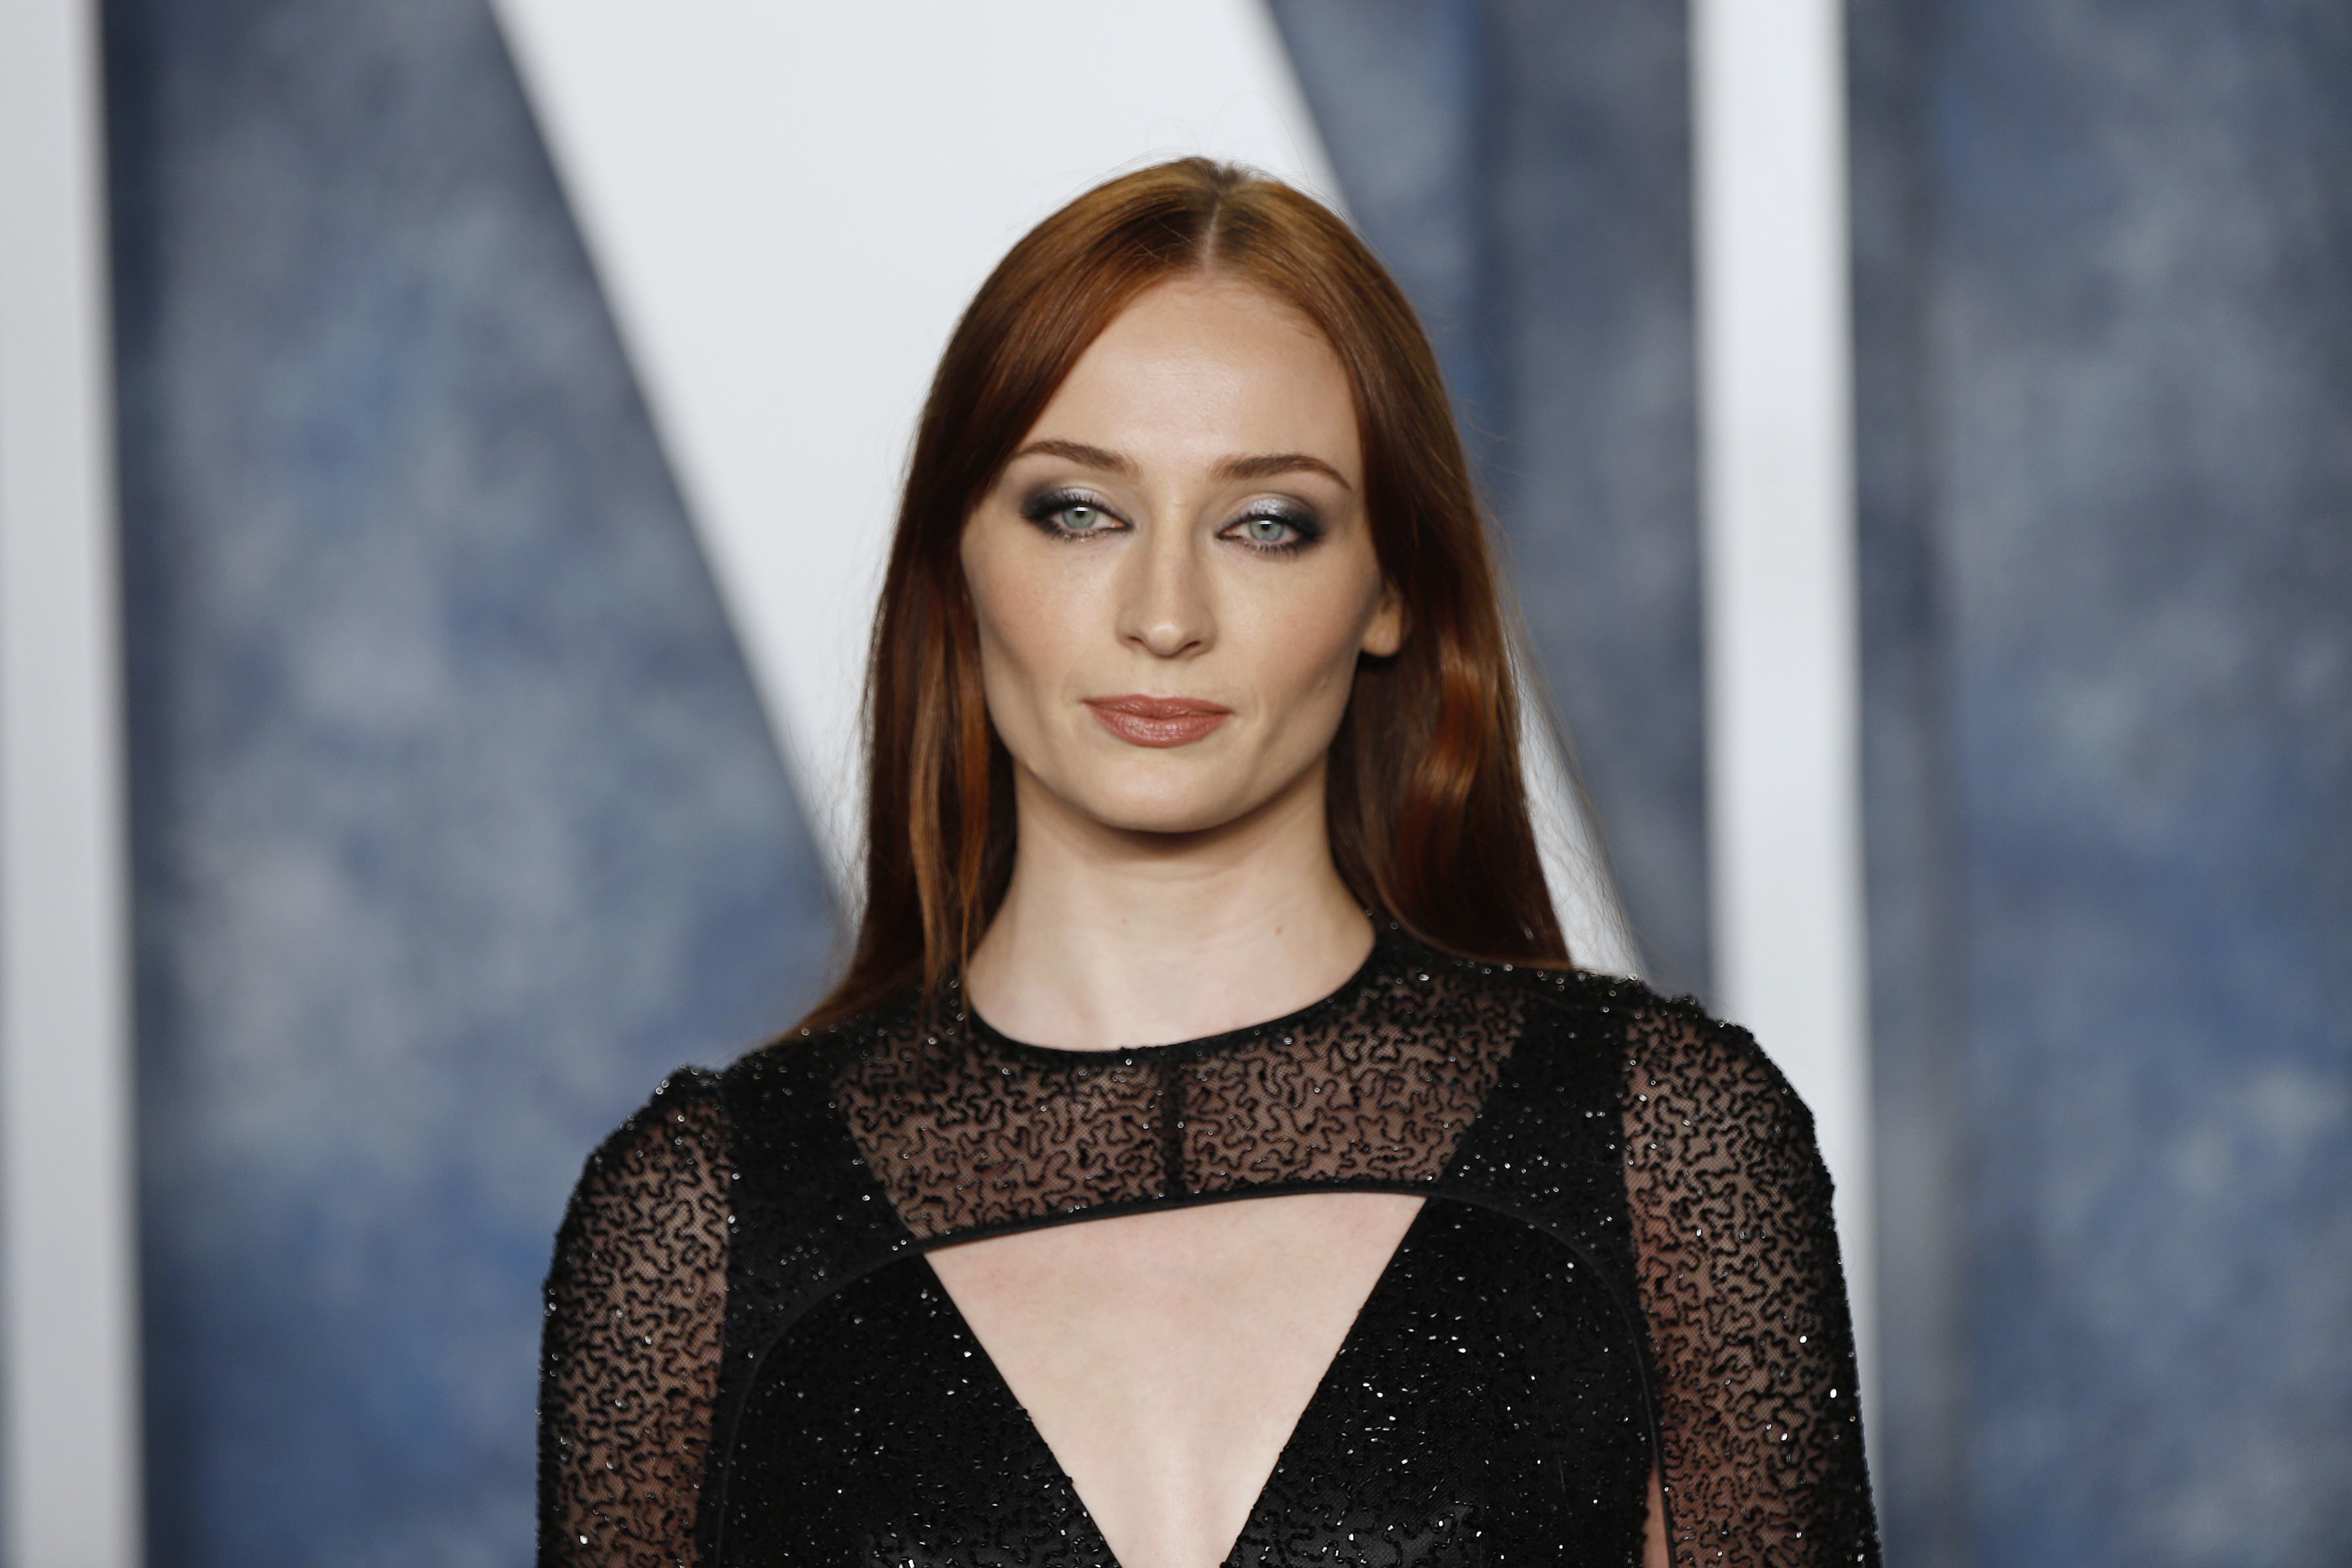 A close-up of Sophie Turner at a media event